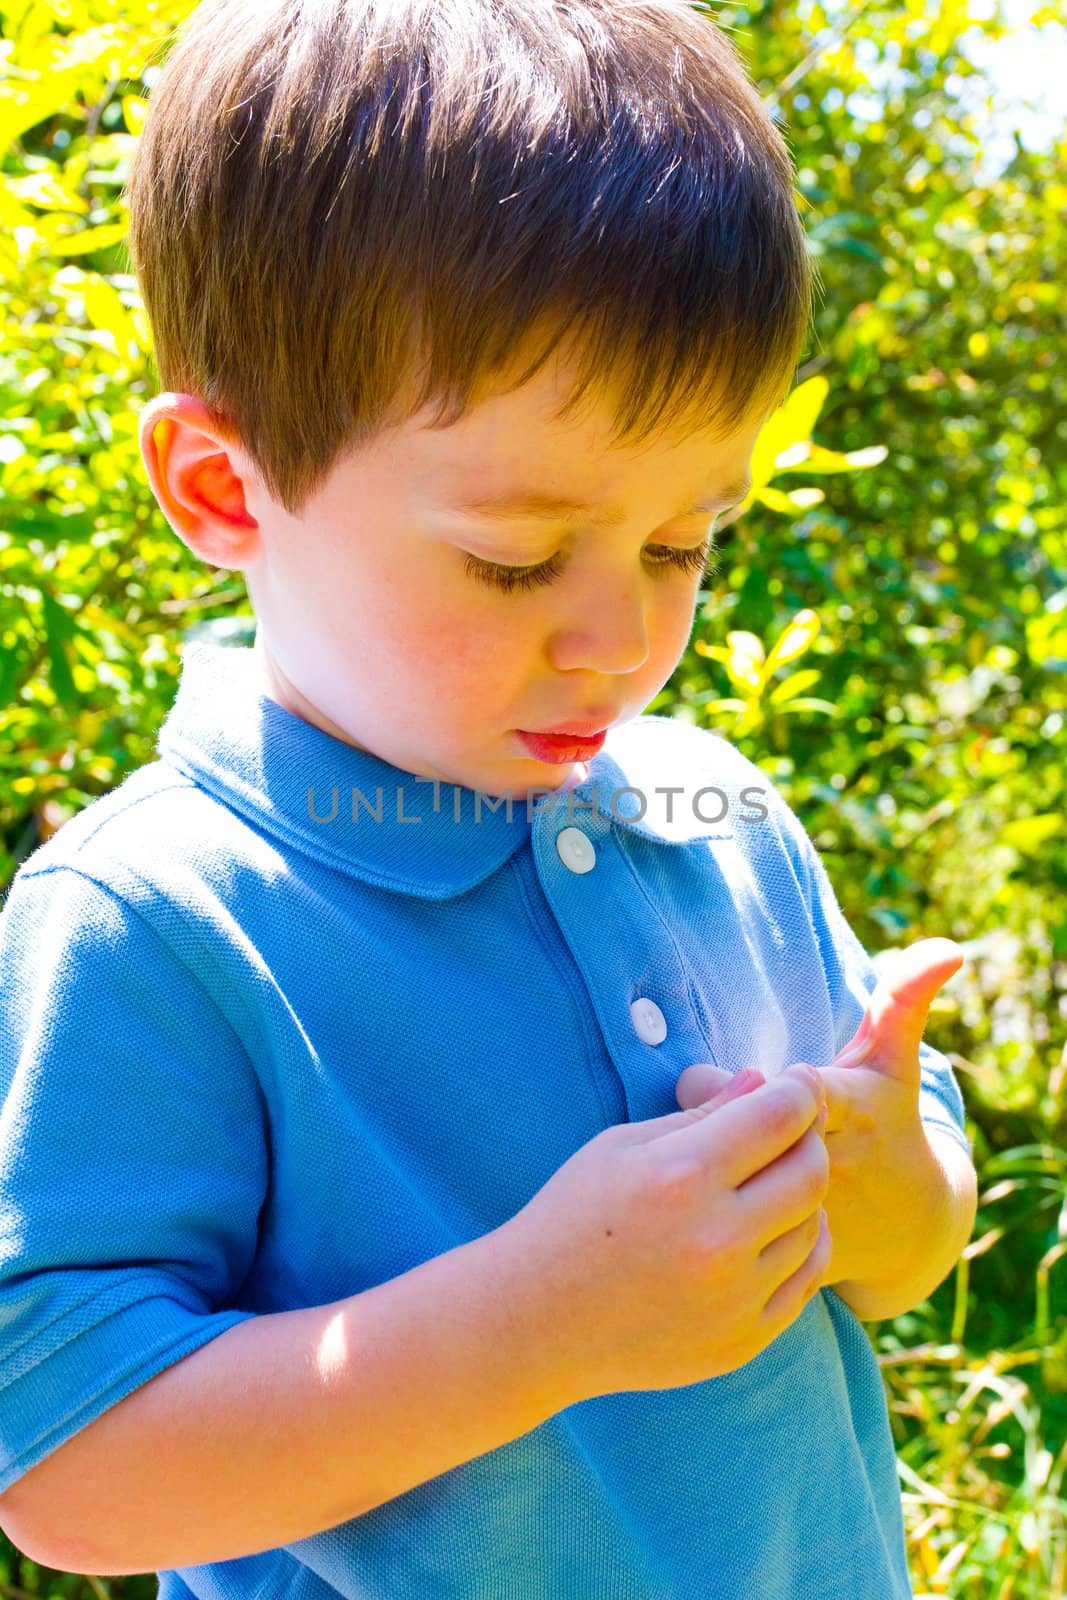 A young boy is playing outdoors while wearing a blue polo shirt.